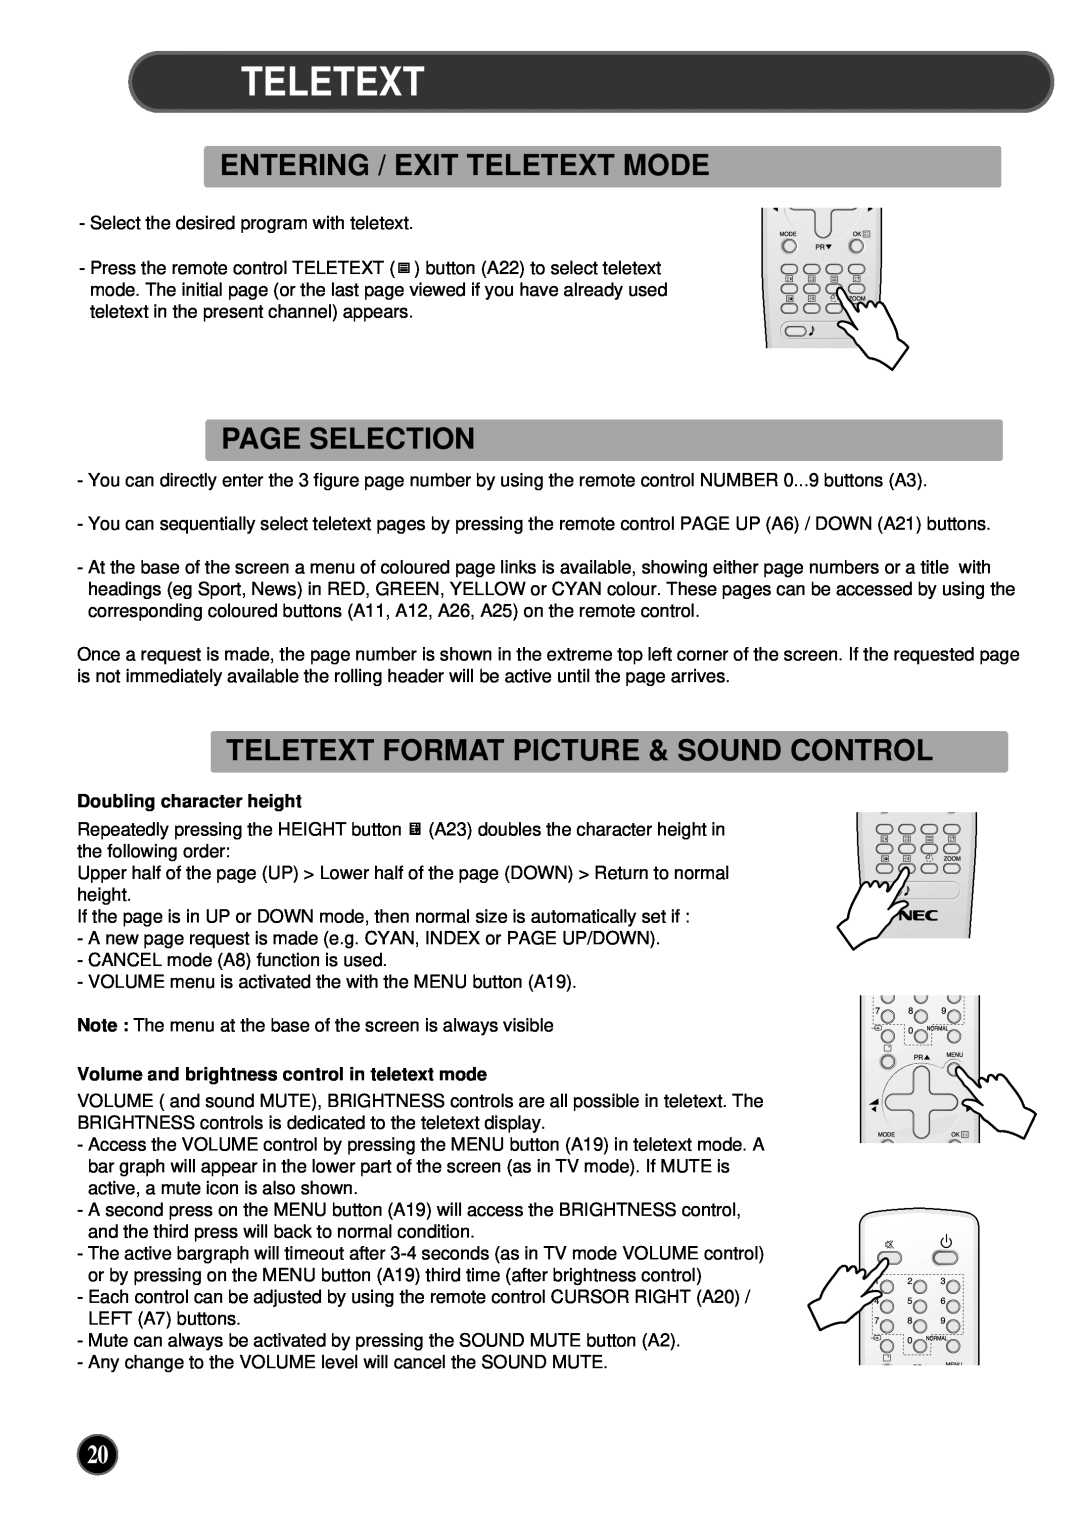 NEC PF32WT100 instruction manual Entering / Exit Teletext Mode, Page Selection, Teletext Format Picture & Sound Control 